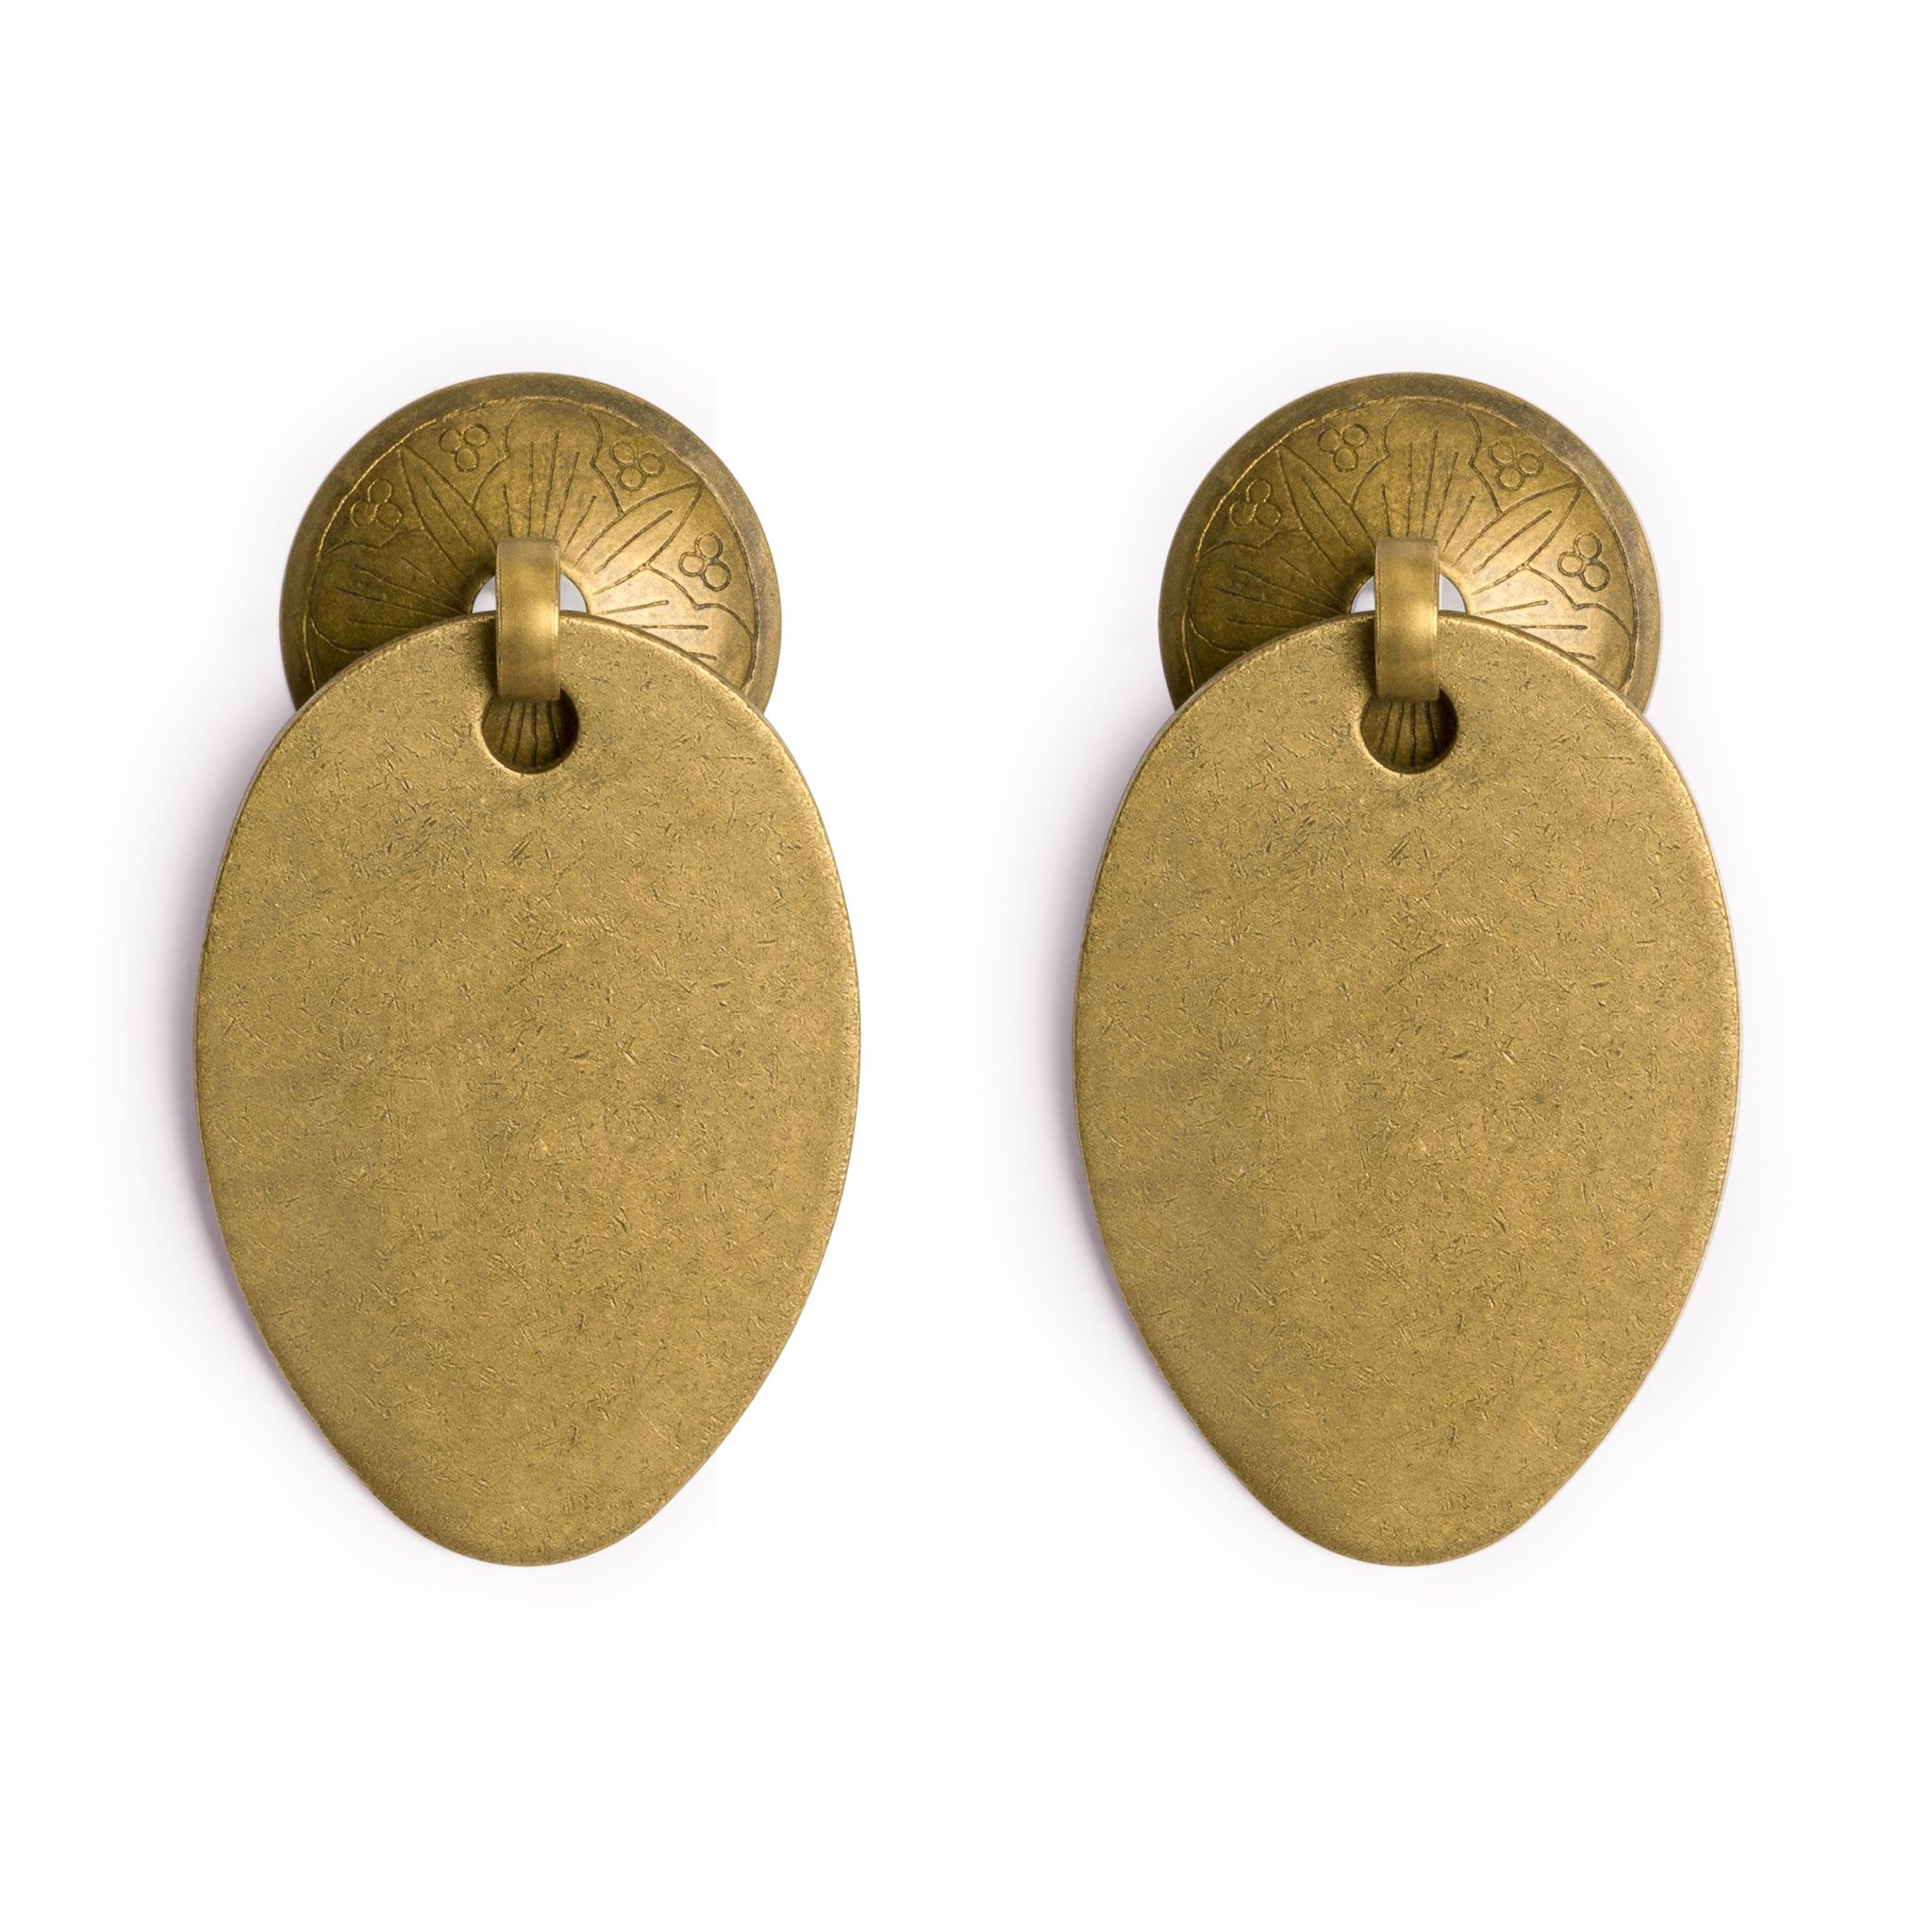 Oval Pulls with Engraved Round Backplate 2.6" - Set of 2-Chinese Brass Hardware